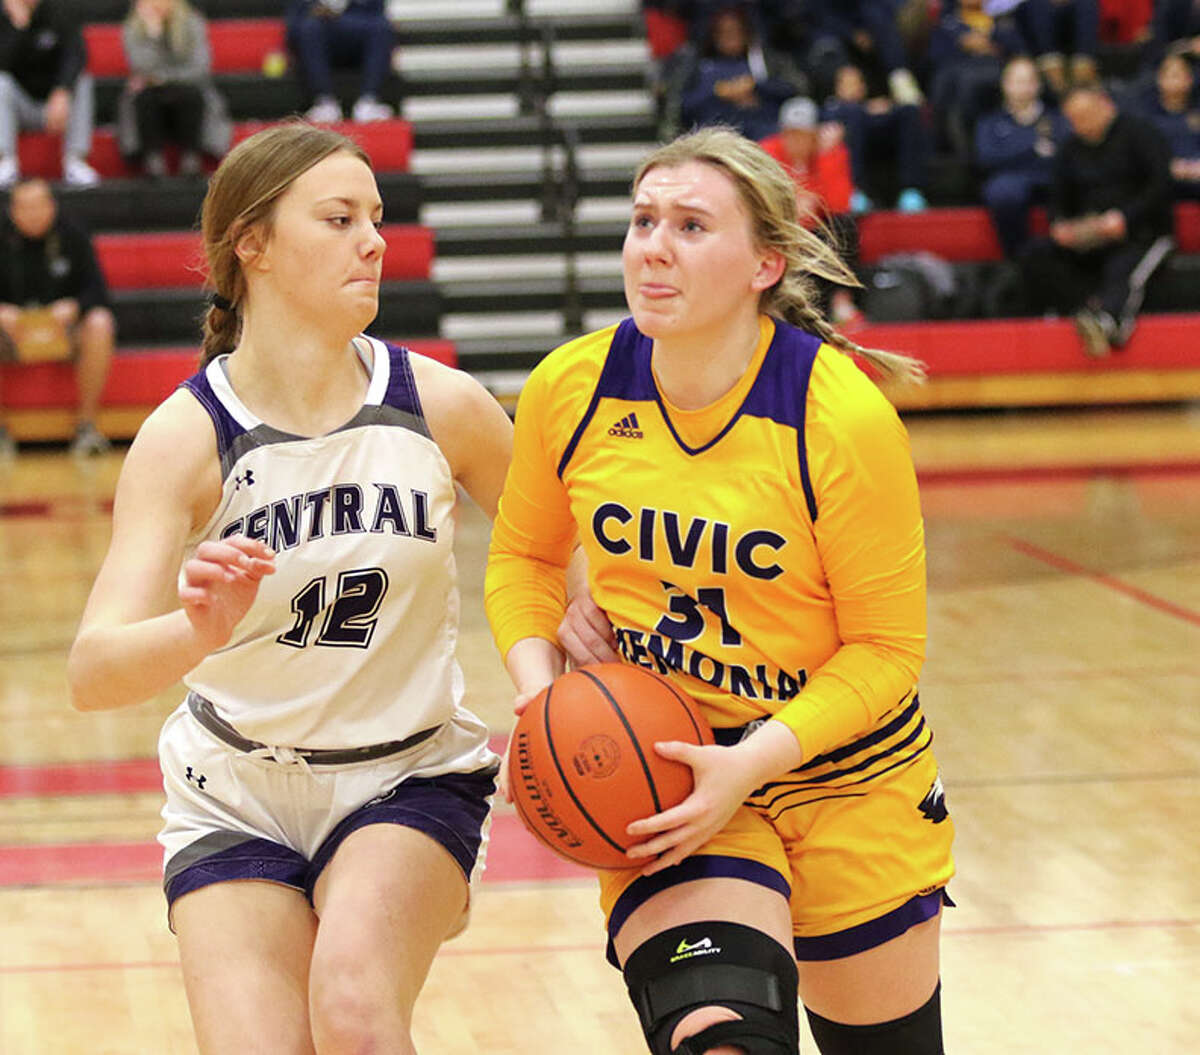 CM's Olivia Durbin (right), shown taking the ball to the basket against Breese Central's Cece Toennies in a game last week at the Highland Tournament, scored 21 points Thursday night in a road win at Triad to reach 1,000 points in her career.